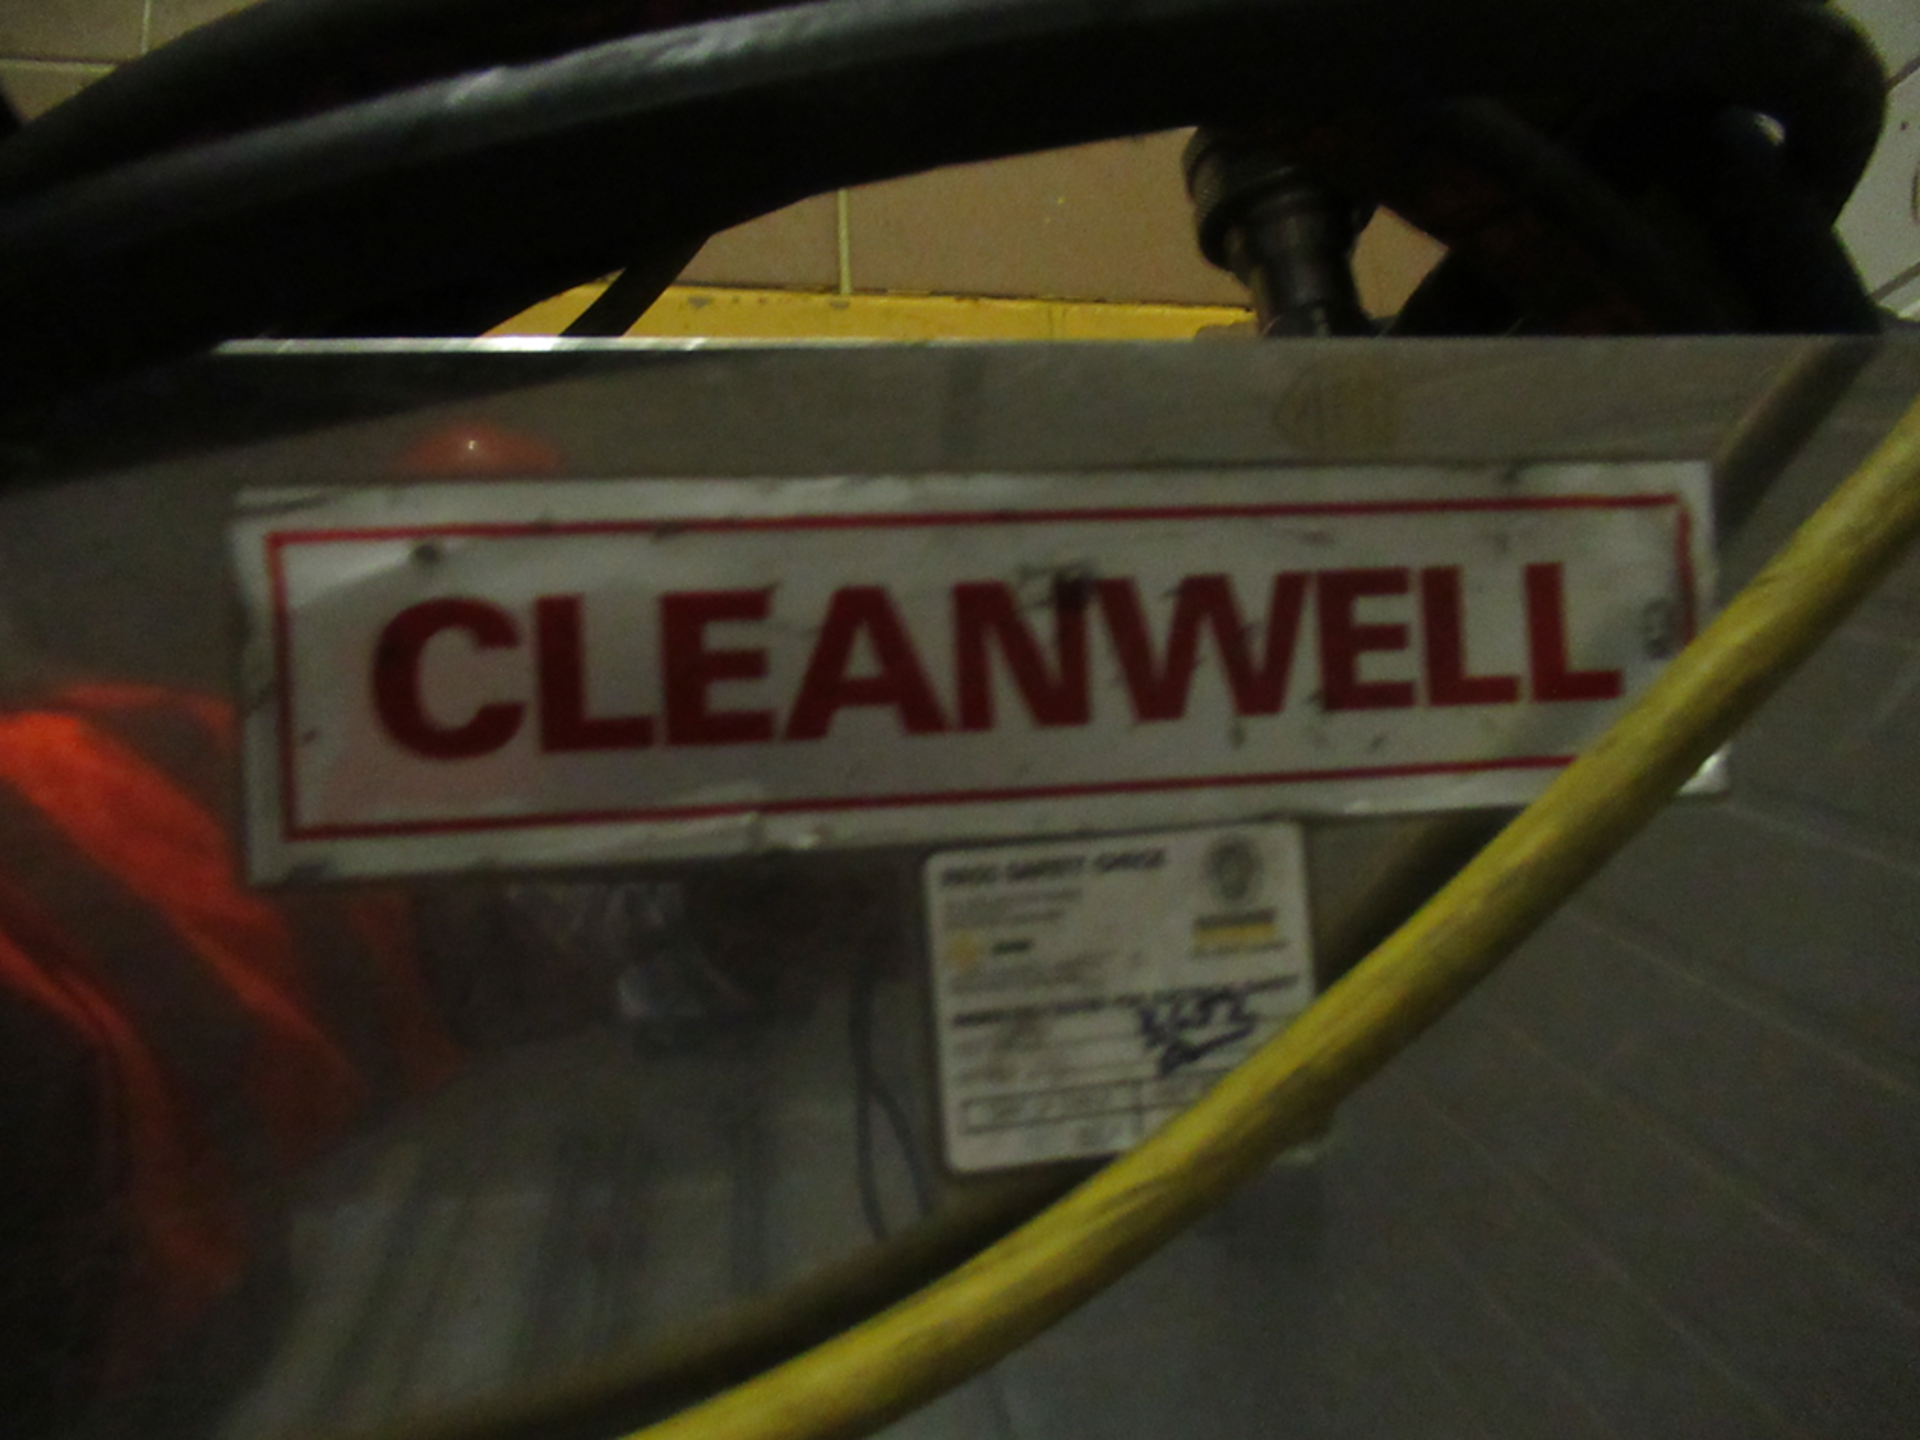 Clean Well Model 12100 110V Power Washer - Image 3 of 4